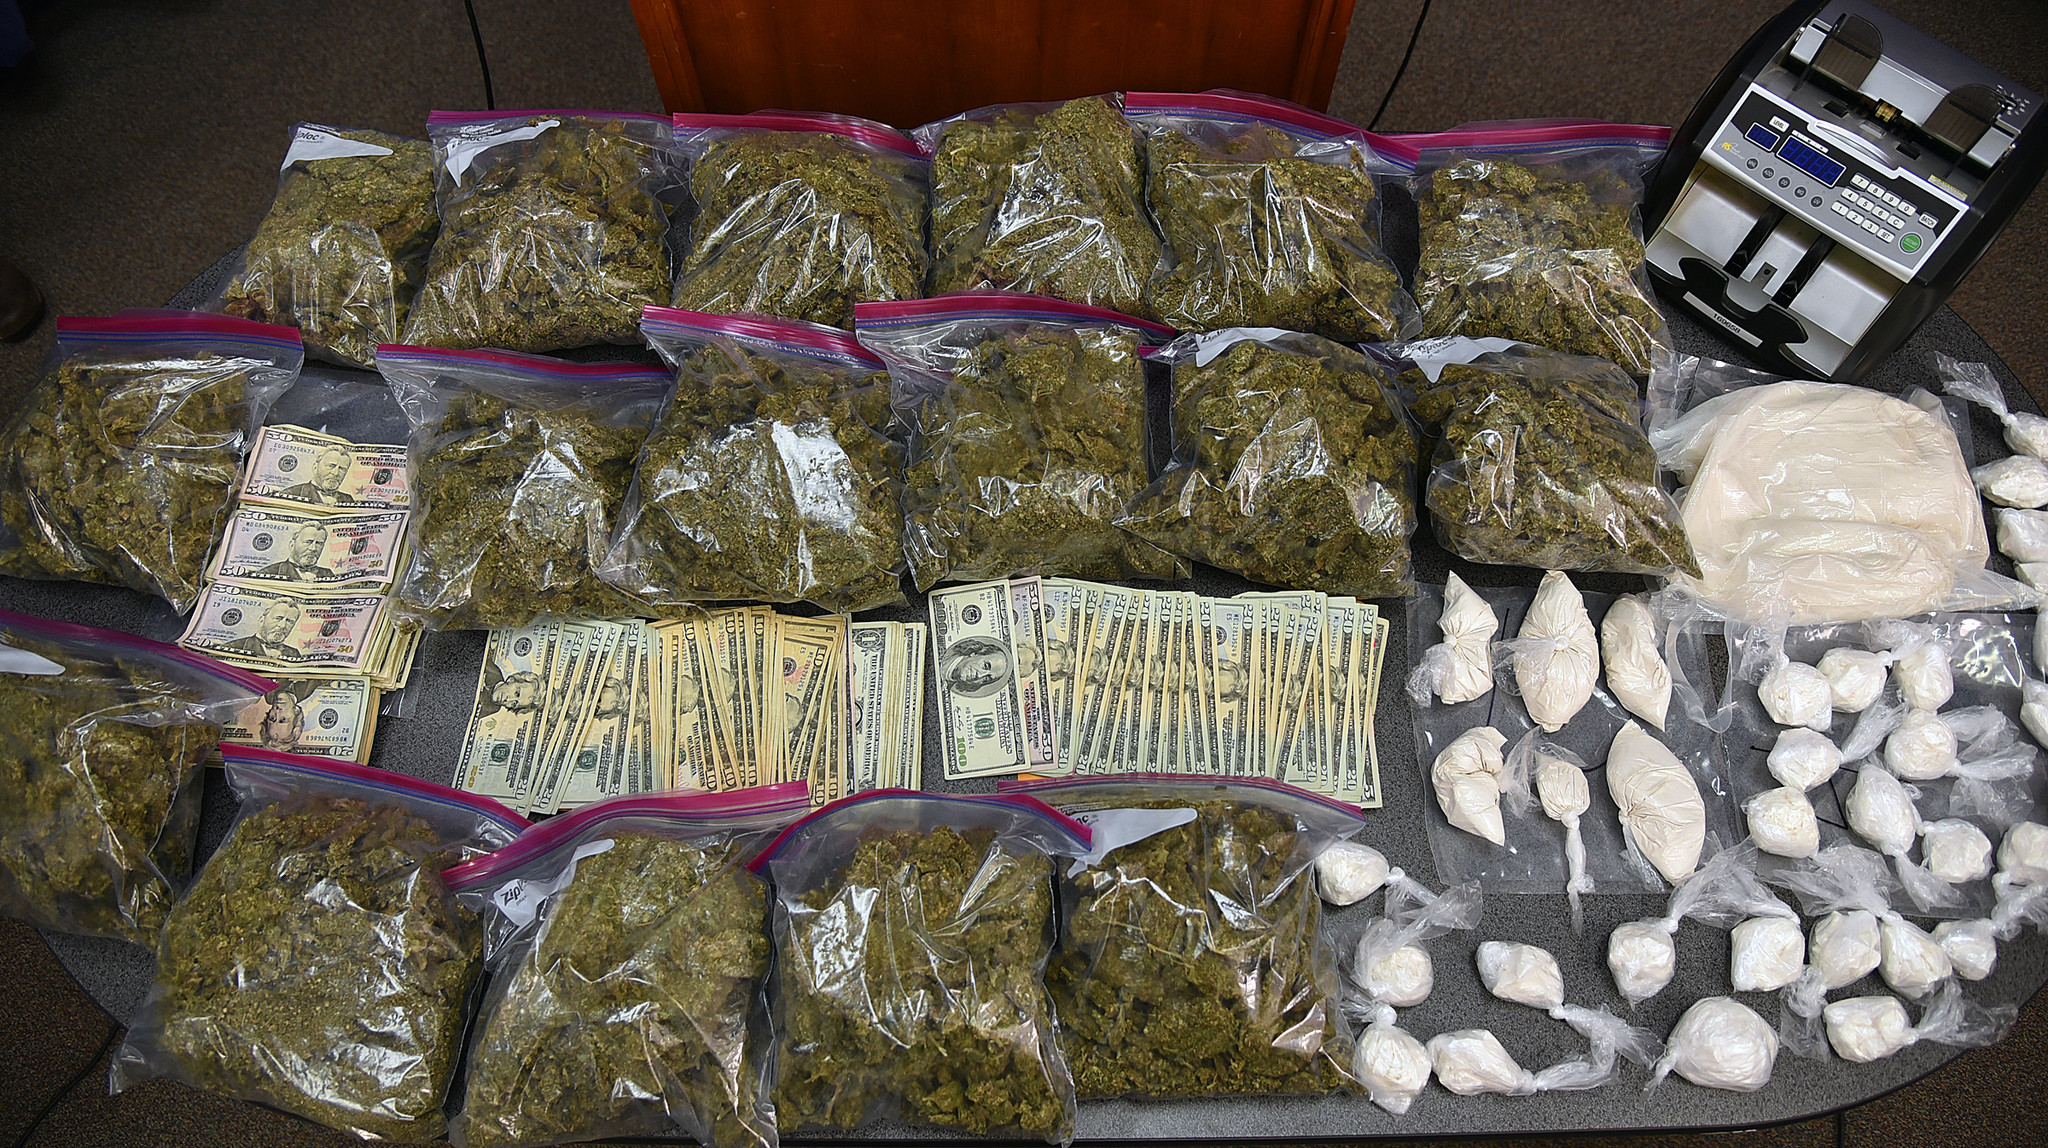 Drugs and money seized - Baltimore Sun